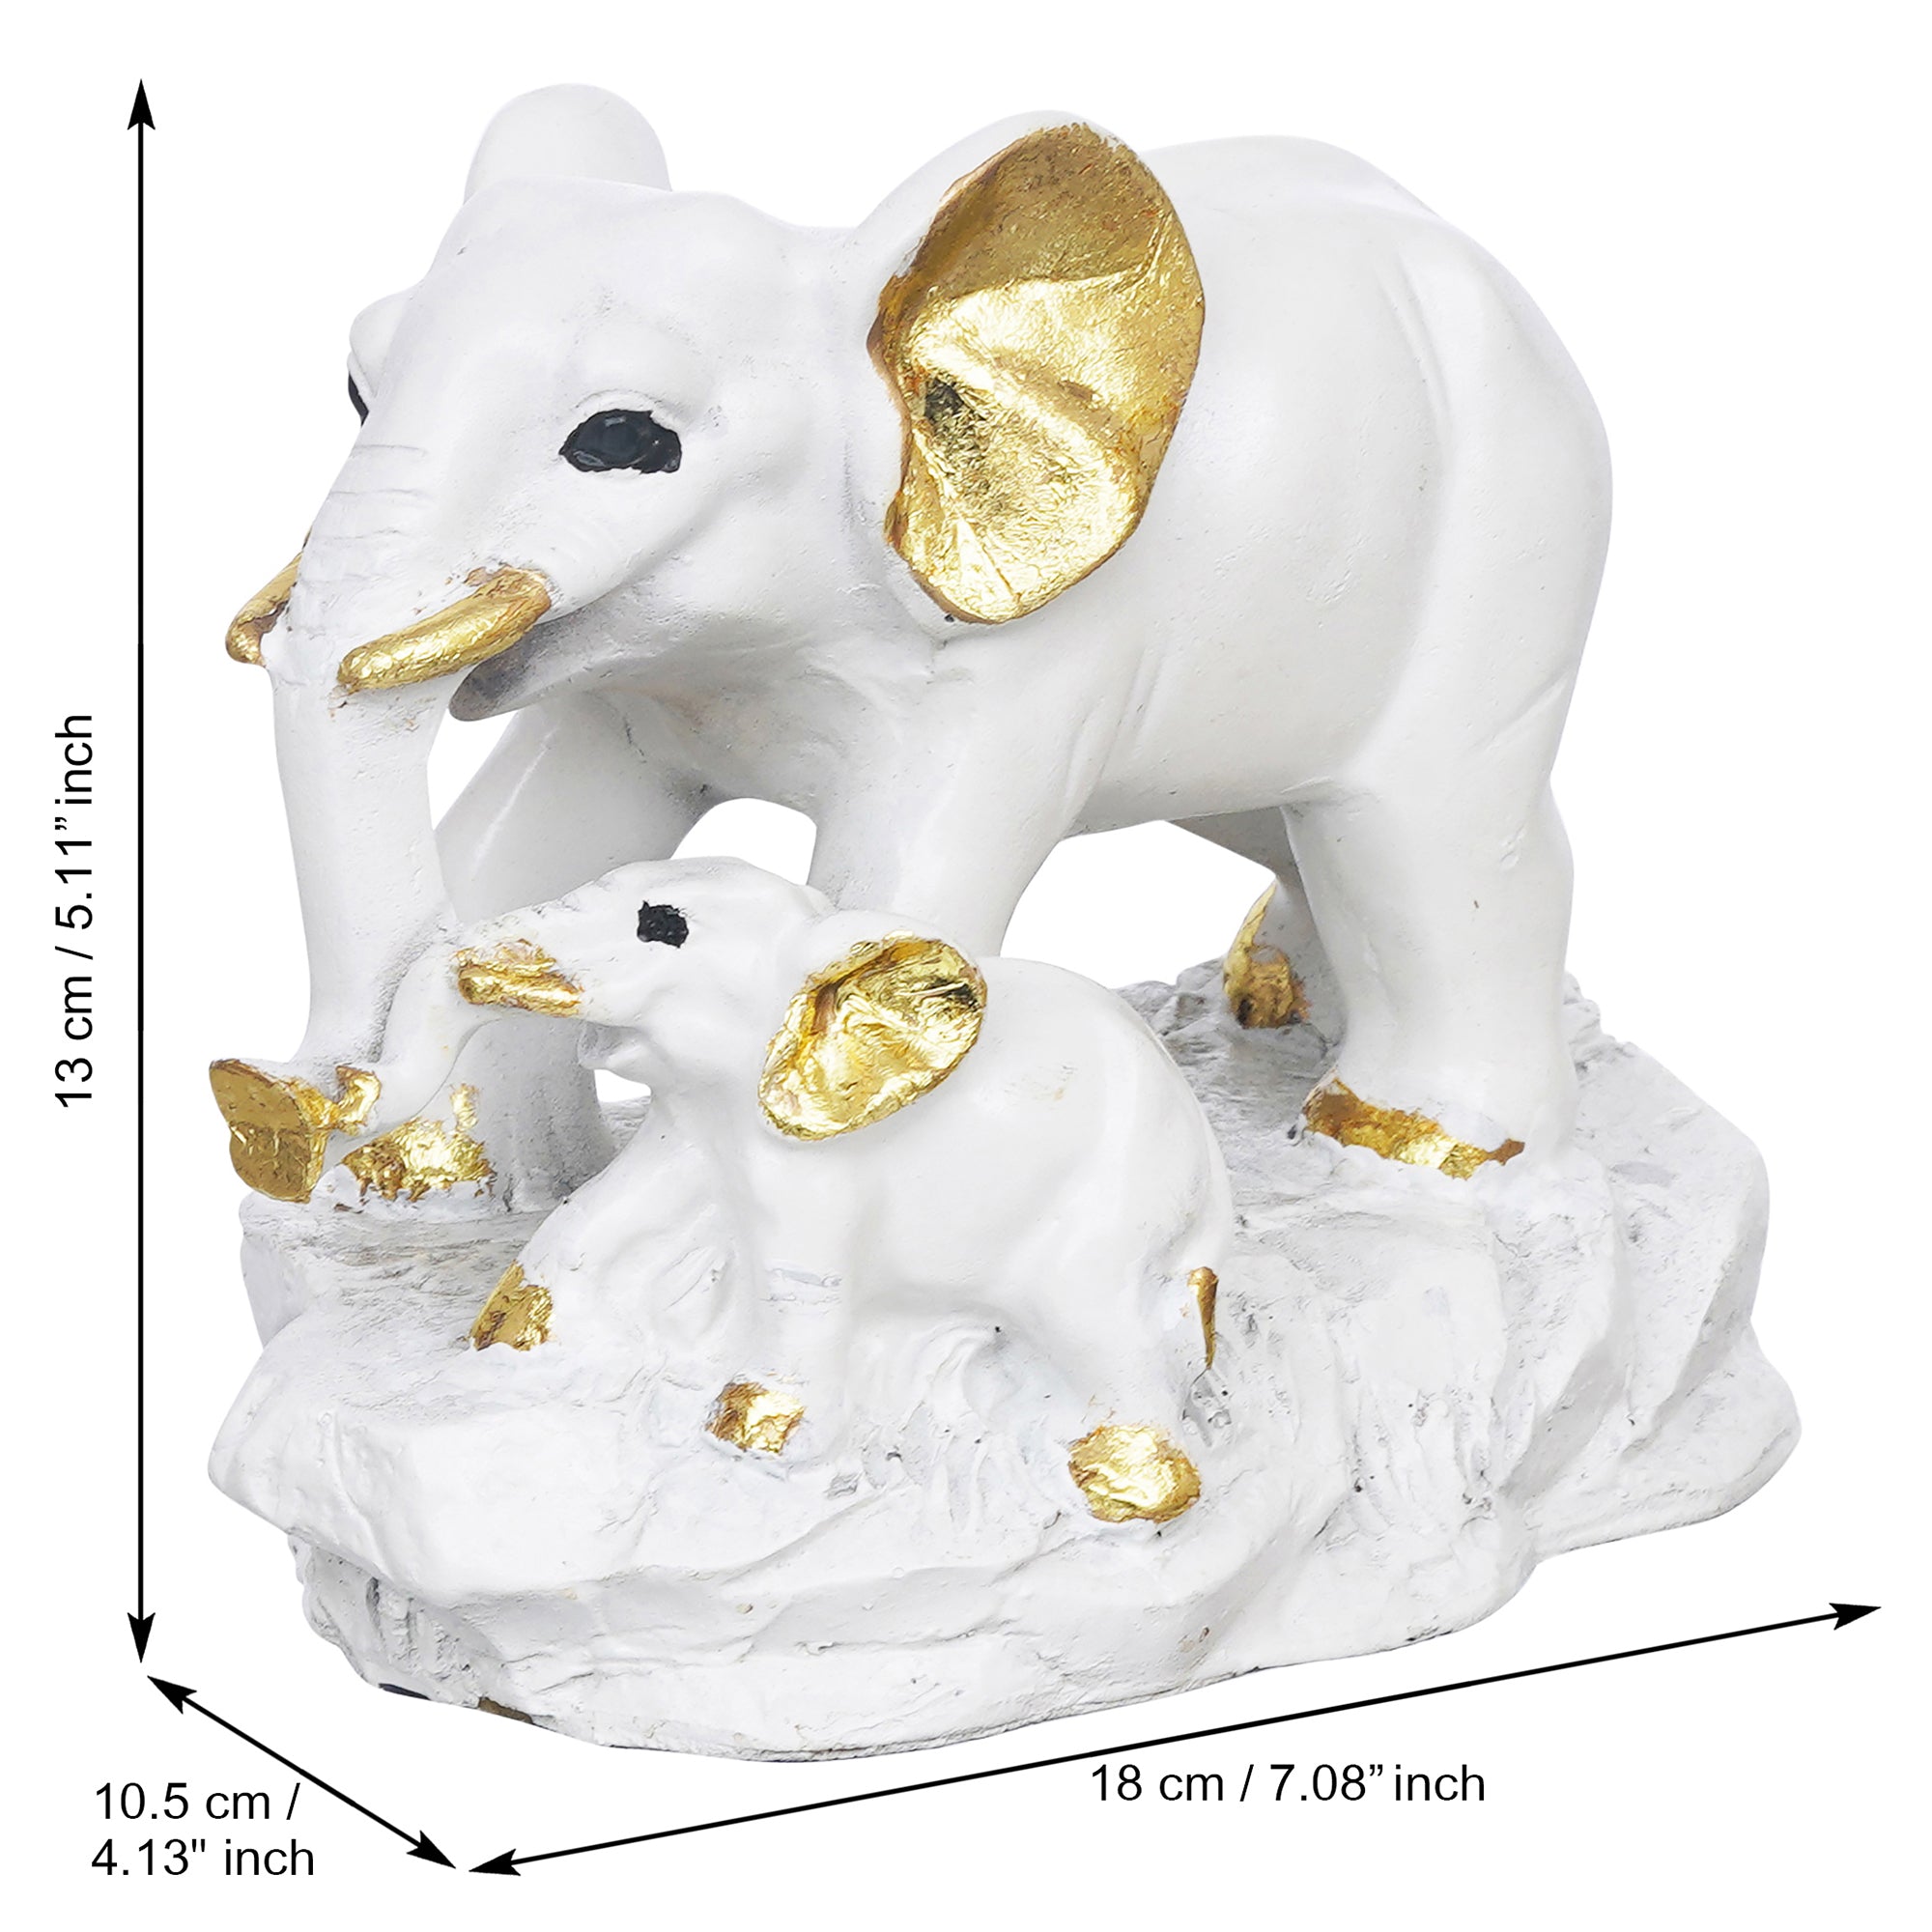 eCraftIndia White and Golden Cute Elephant with Baby Elephant Statues Animal Figurines Decorative Showpieces for Home Decor 3